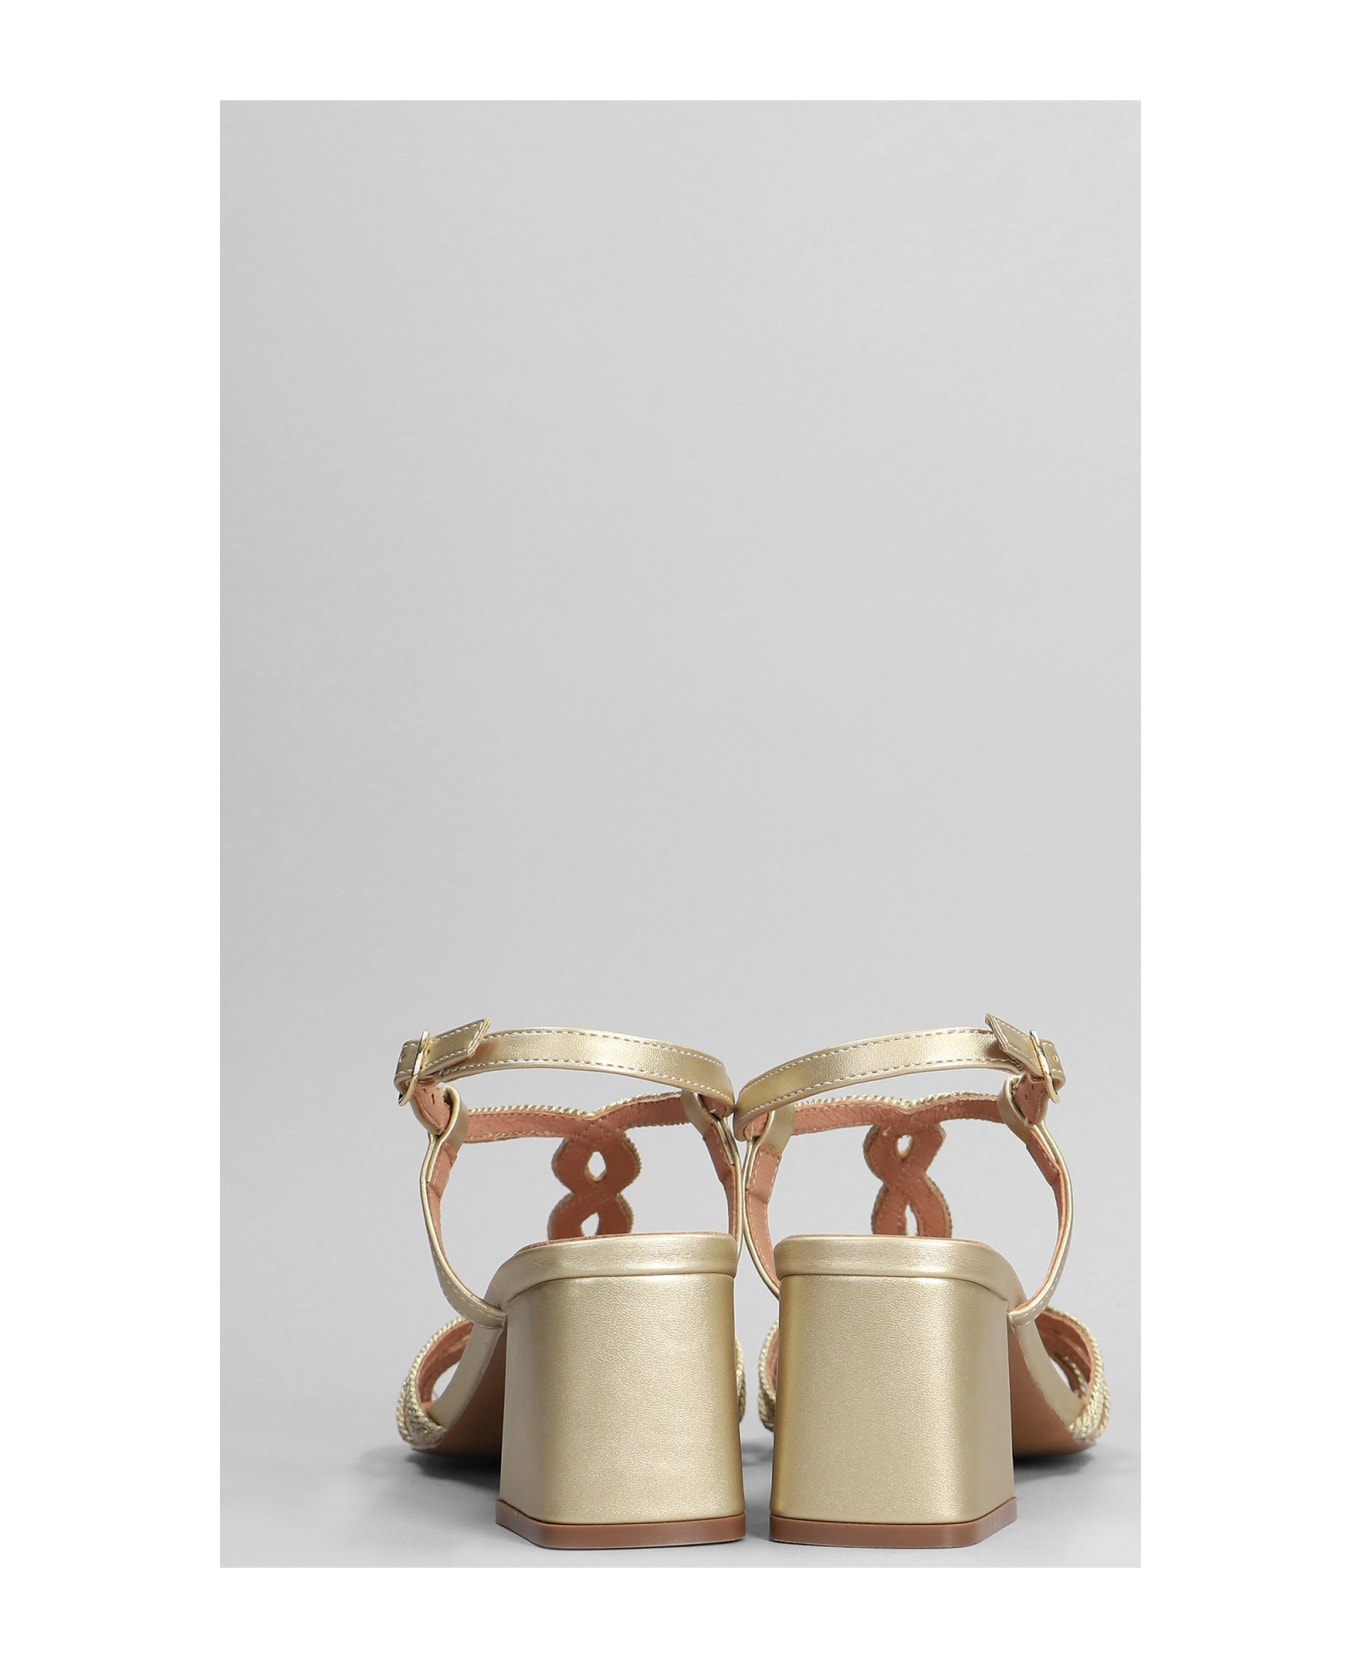 Bibi Lou Pend Sandals In Gold Leather - gold